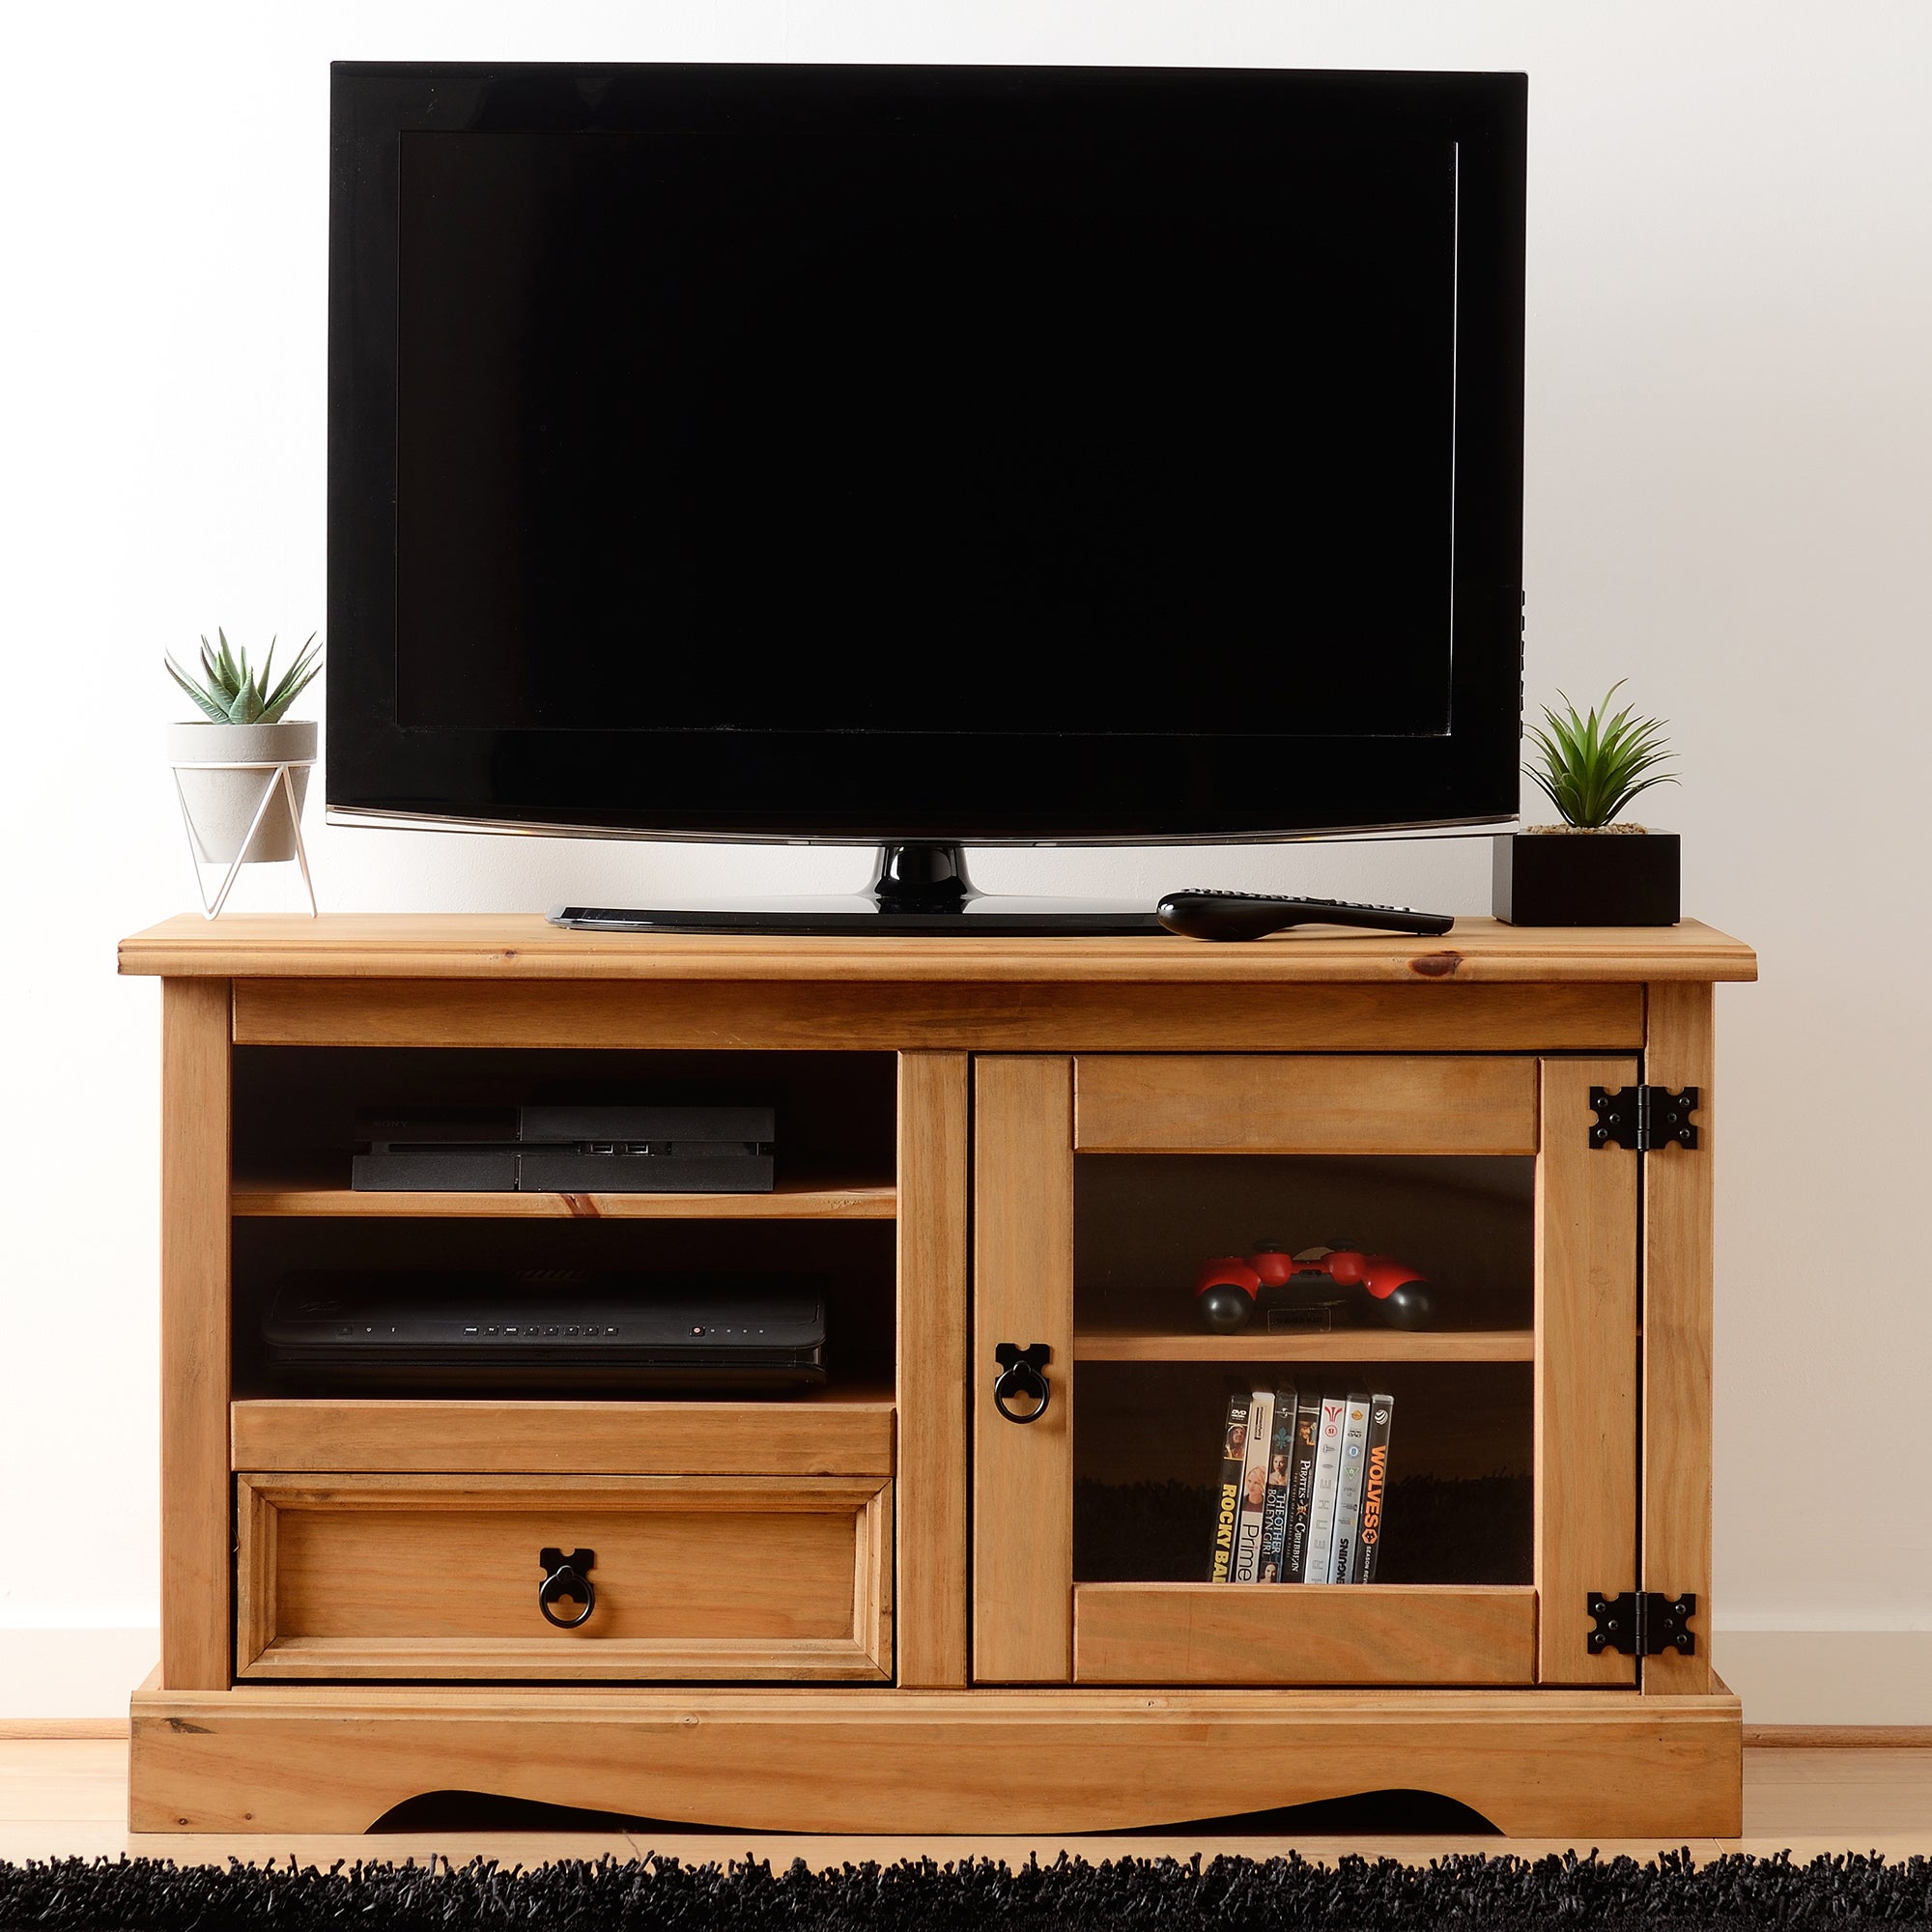 Corona TV Unit, Pine for TVs up to 46"